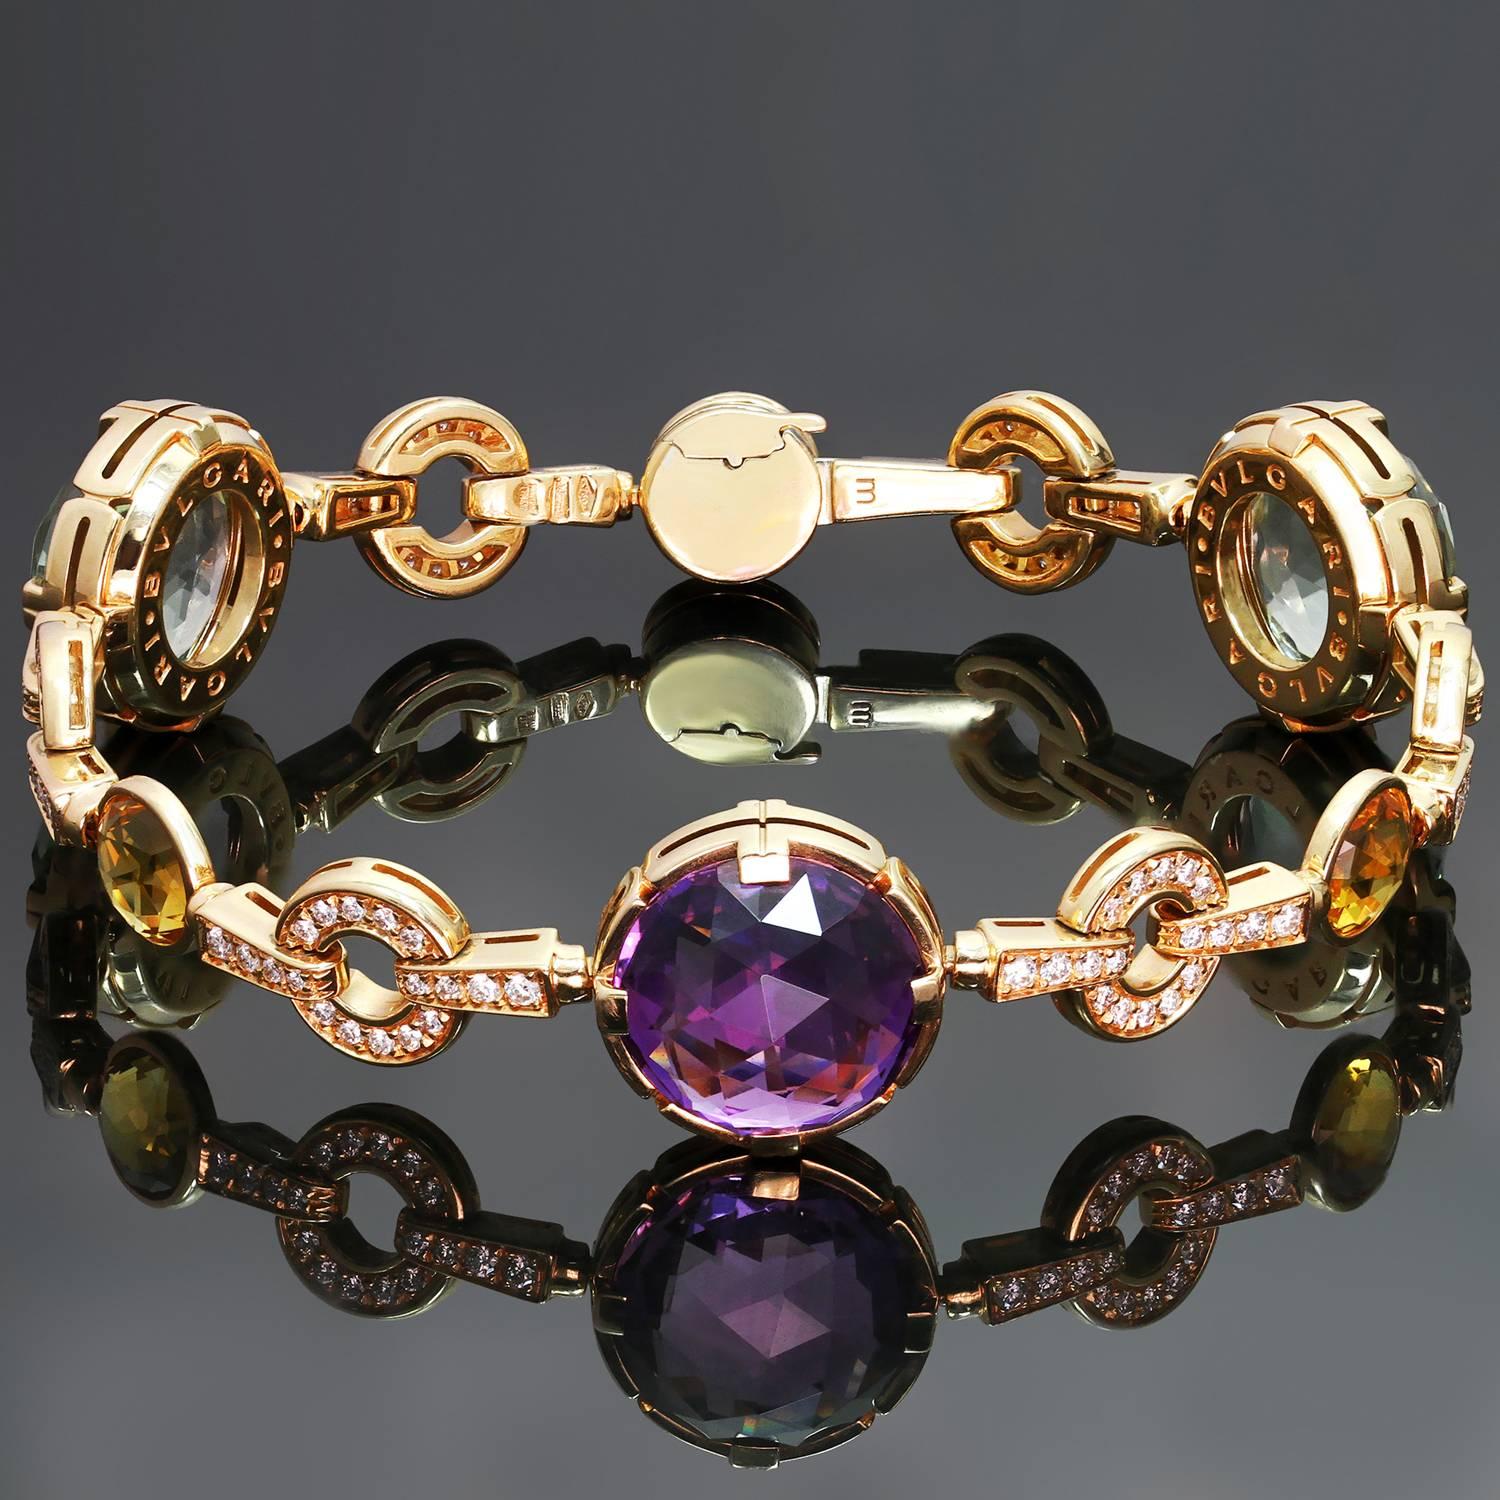 This gorgeous cocktail bracelet from Bulgari's vibrant Parentesi collection is crafted in 18k rose gold and beautifully set with a amethyst, green and citrine quartz, and brilliant-cut round diamonds. Made in Italy circa 2010s. Measurements: 0.59